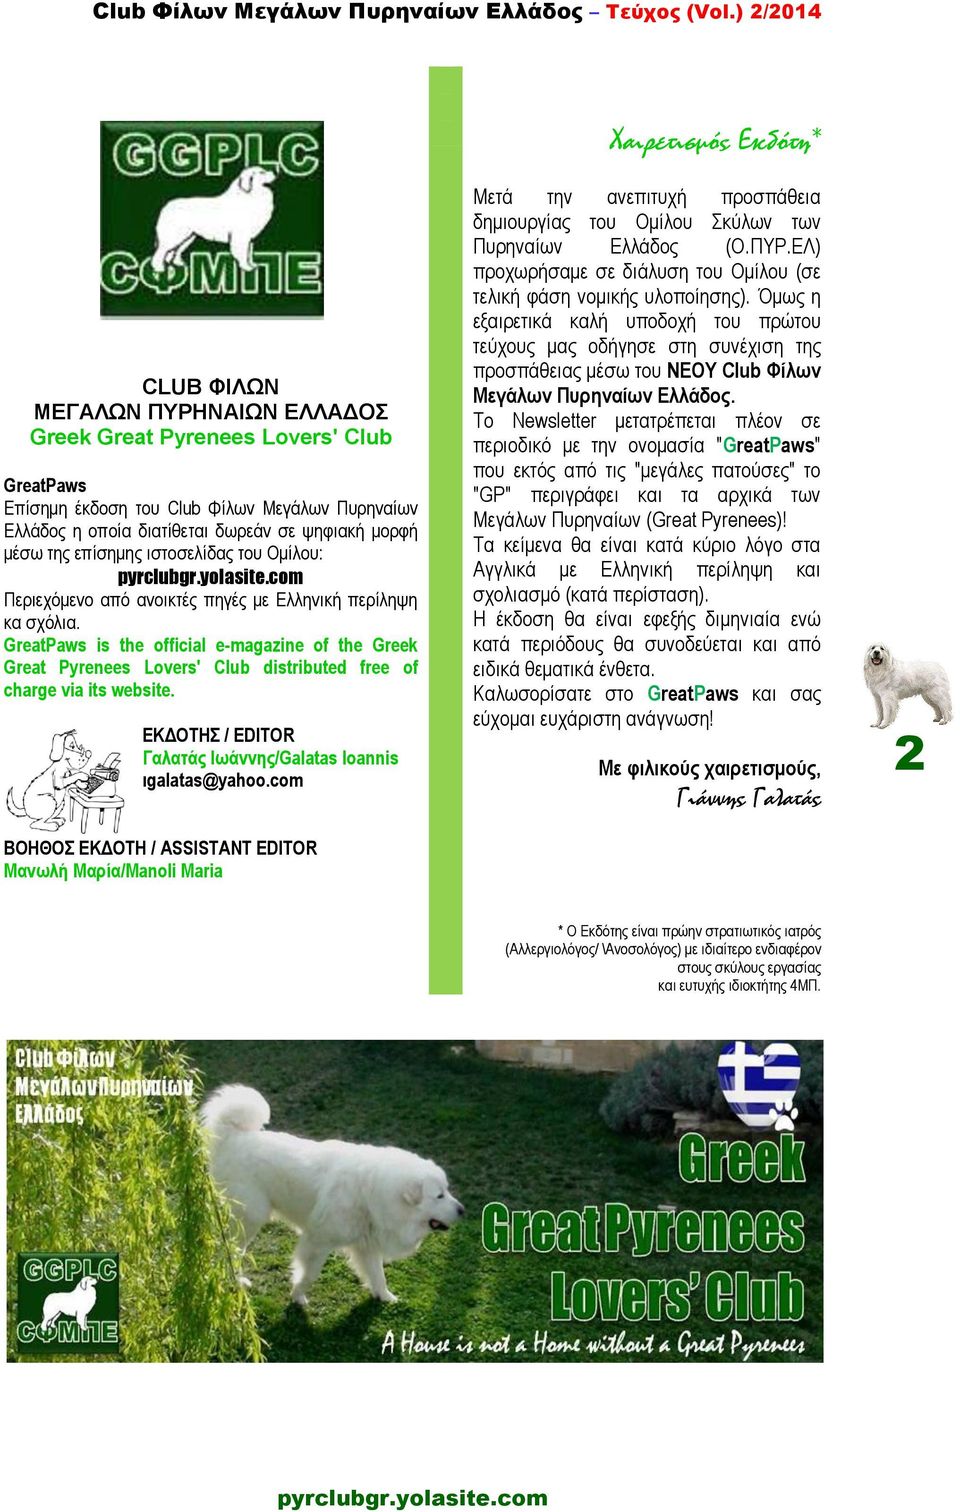 GreatPaws is the official e-magazine of the Greek Great Pyrenees Lovers' Club distributed free of charge via its website. ΔΚΓΟΤΗΣ / EDITOR Γαιαηάο Ισάλλεο/Galatas Ioannis ηgalatas@yahoo.